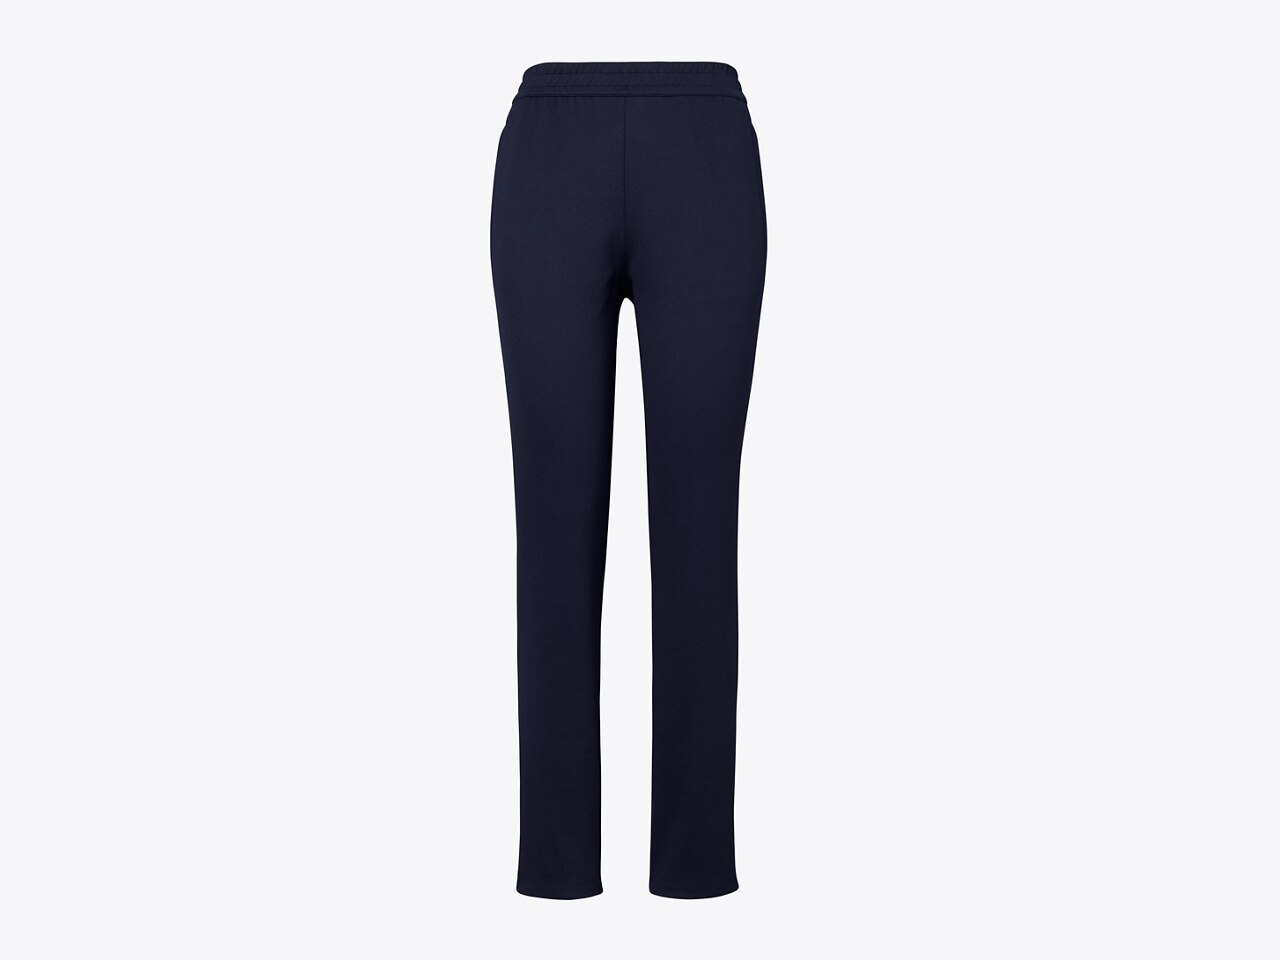 Polyester Loop Knit Pants Women's Track Pant, Model Name/Number